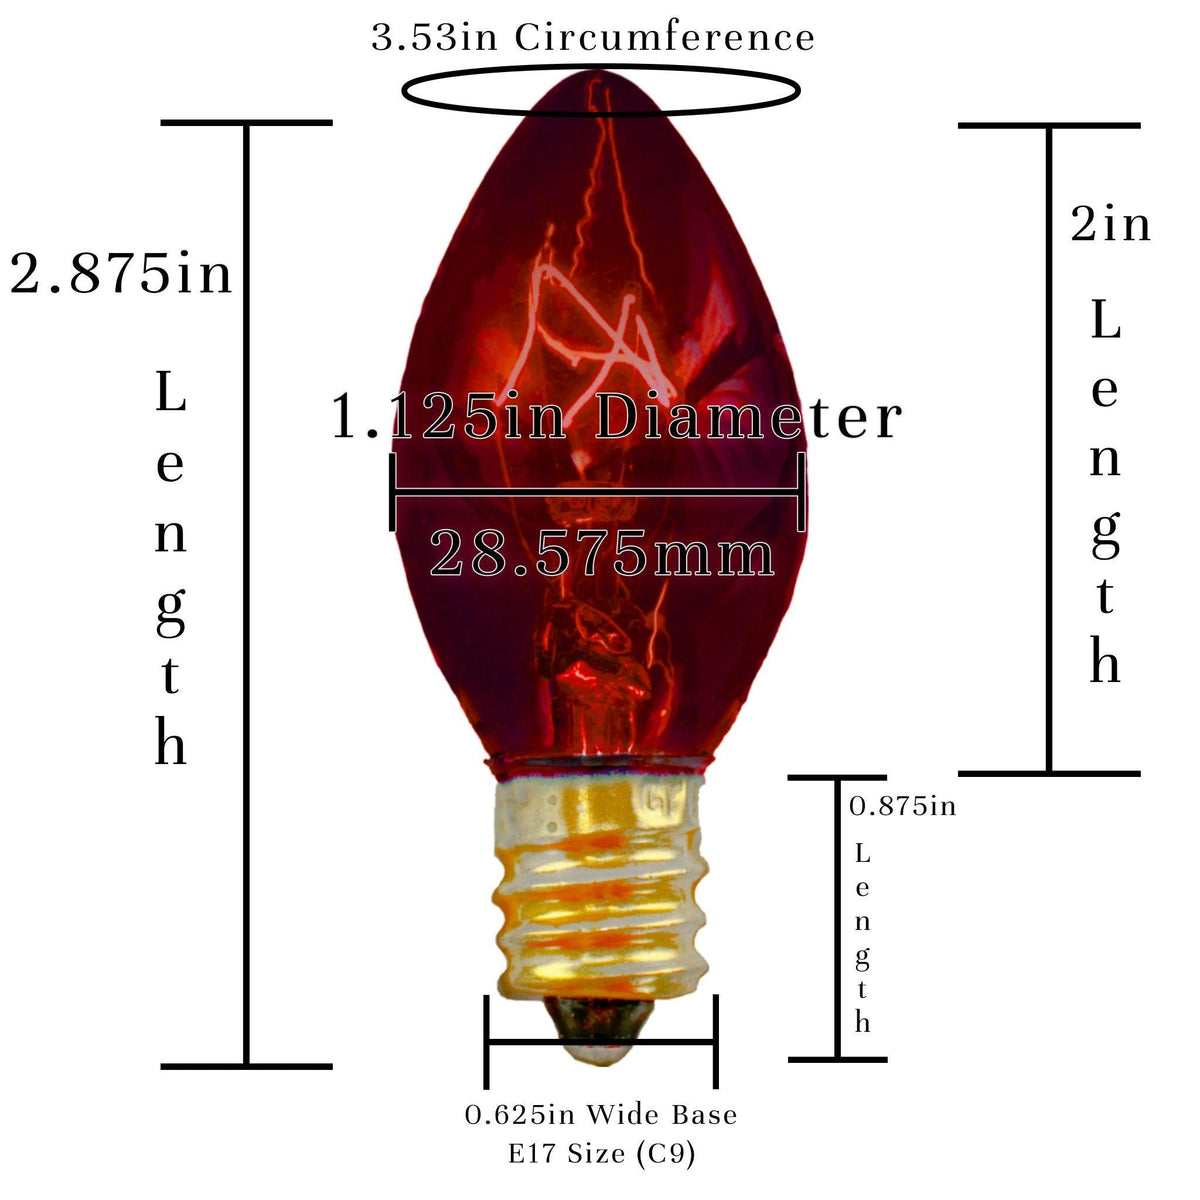 25FT C7/C9 Candelabra Style Red Outdoor String Light Bulb Sets sold by Lee Display.com